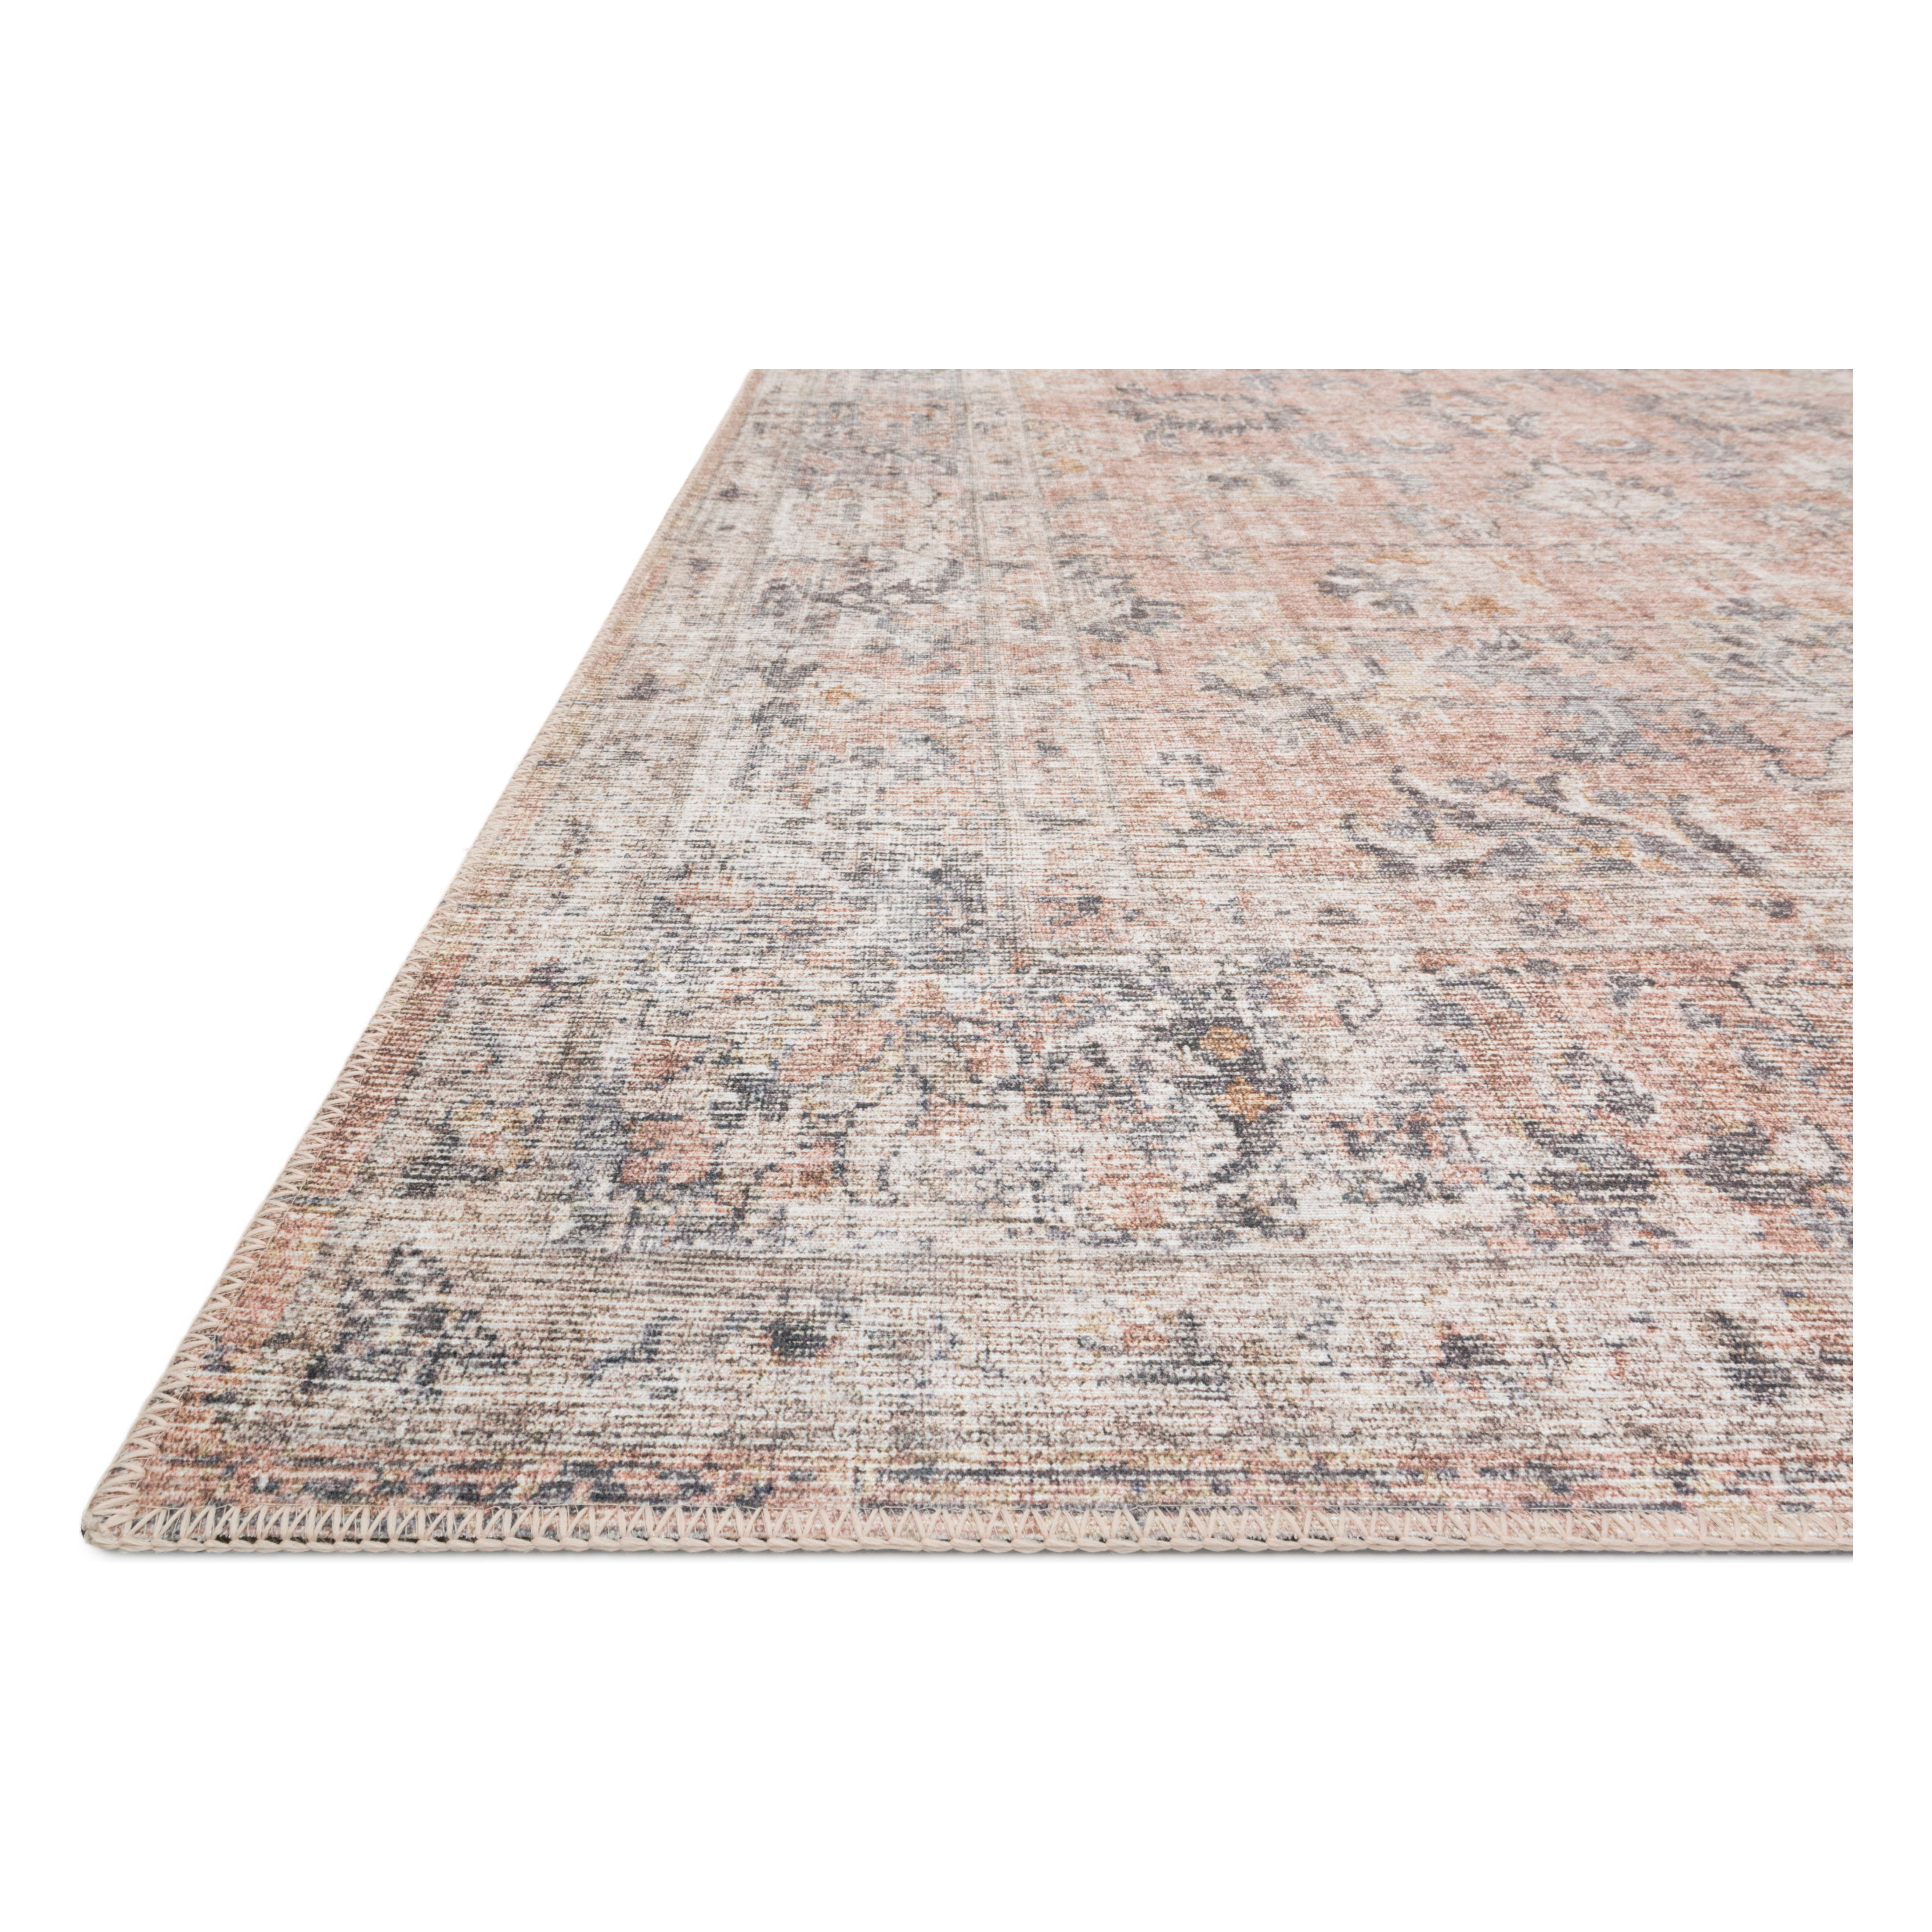 The Skye Blush/Grey SKY-01 area rug by Loloi, is timeless and classic with a beautiful, old-world design in tones of blush, grey, and ivory. Power-loomed of 100% polyester, this rug is great with families and pets. This rug is perfect for kitchens, dining rooms, entry ways, or anywhere high traffic. Amethyst Home provides interior design, new construction, custom furniture, and rugs for the Scottsdale metro area.